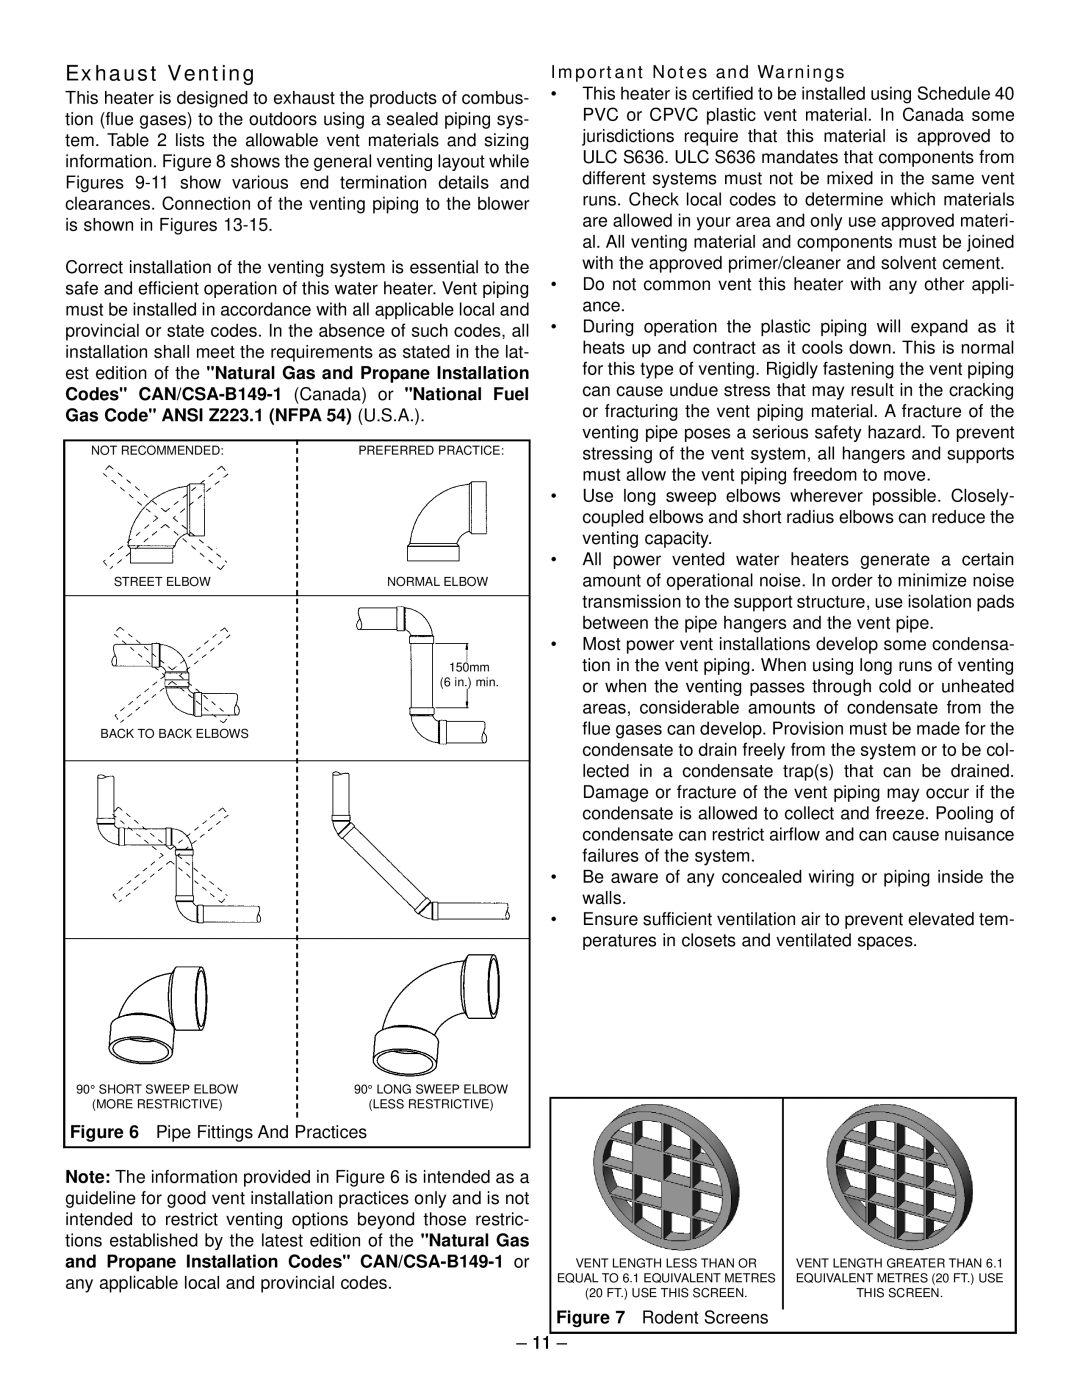 GSW 319594-000 manual Exhaust Venting, Important Notes and Warnings, Codes CAN/CSA-B149-1 Canada or National Fuel 